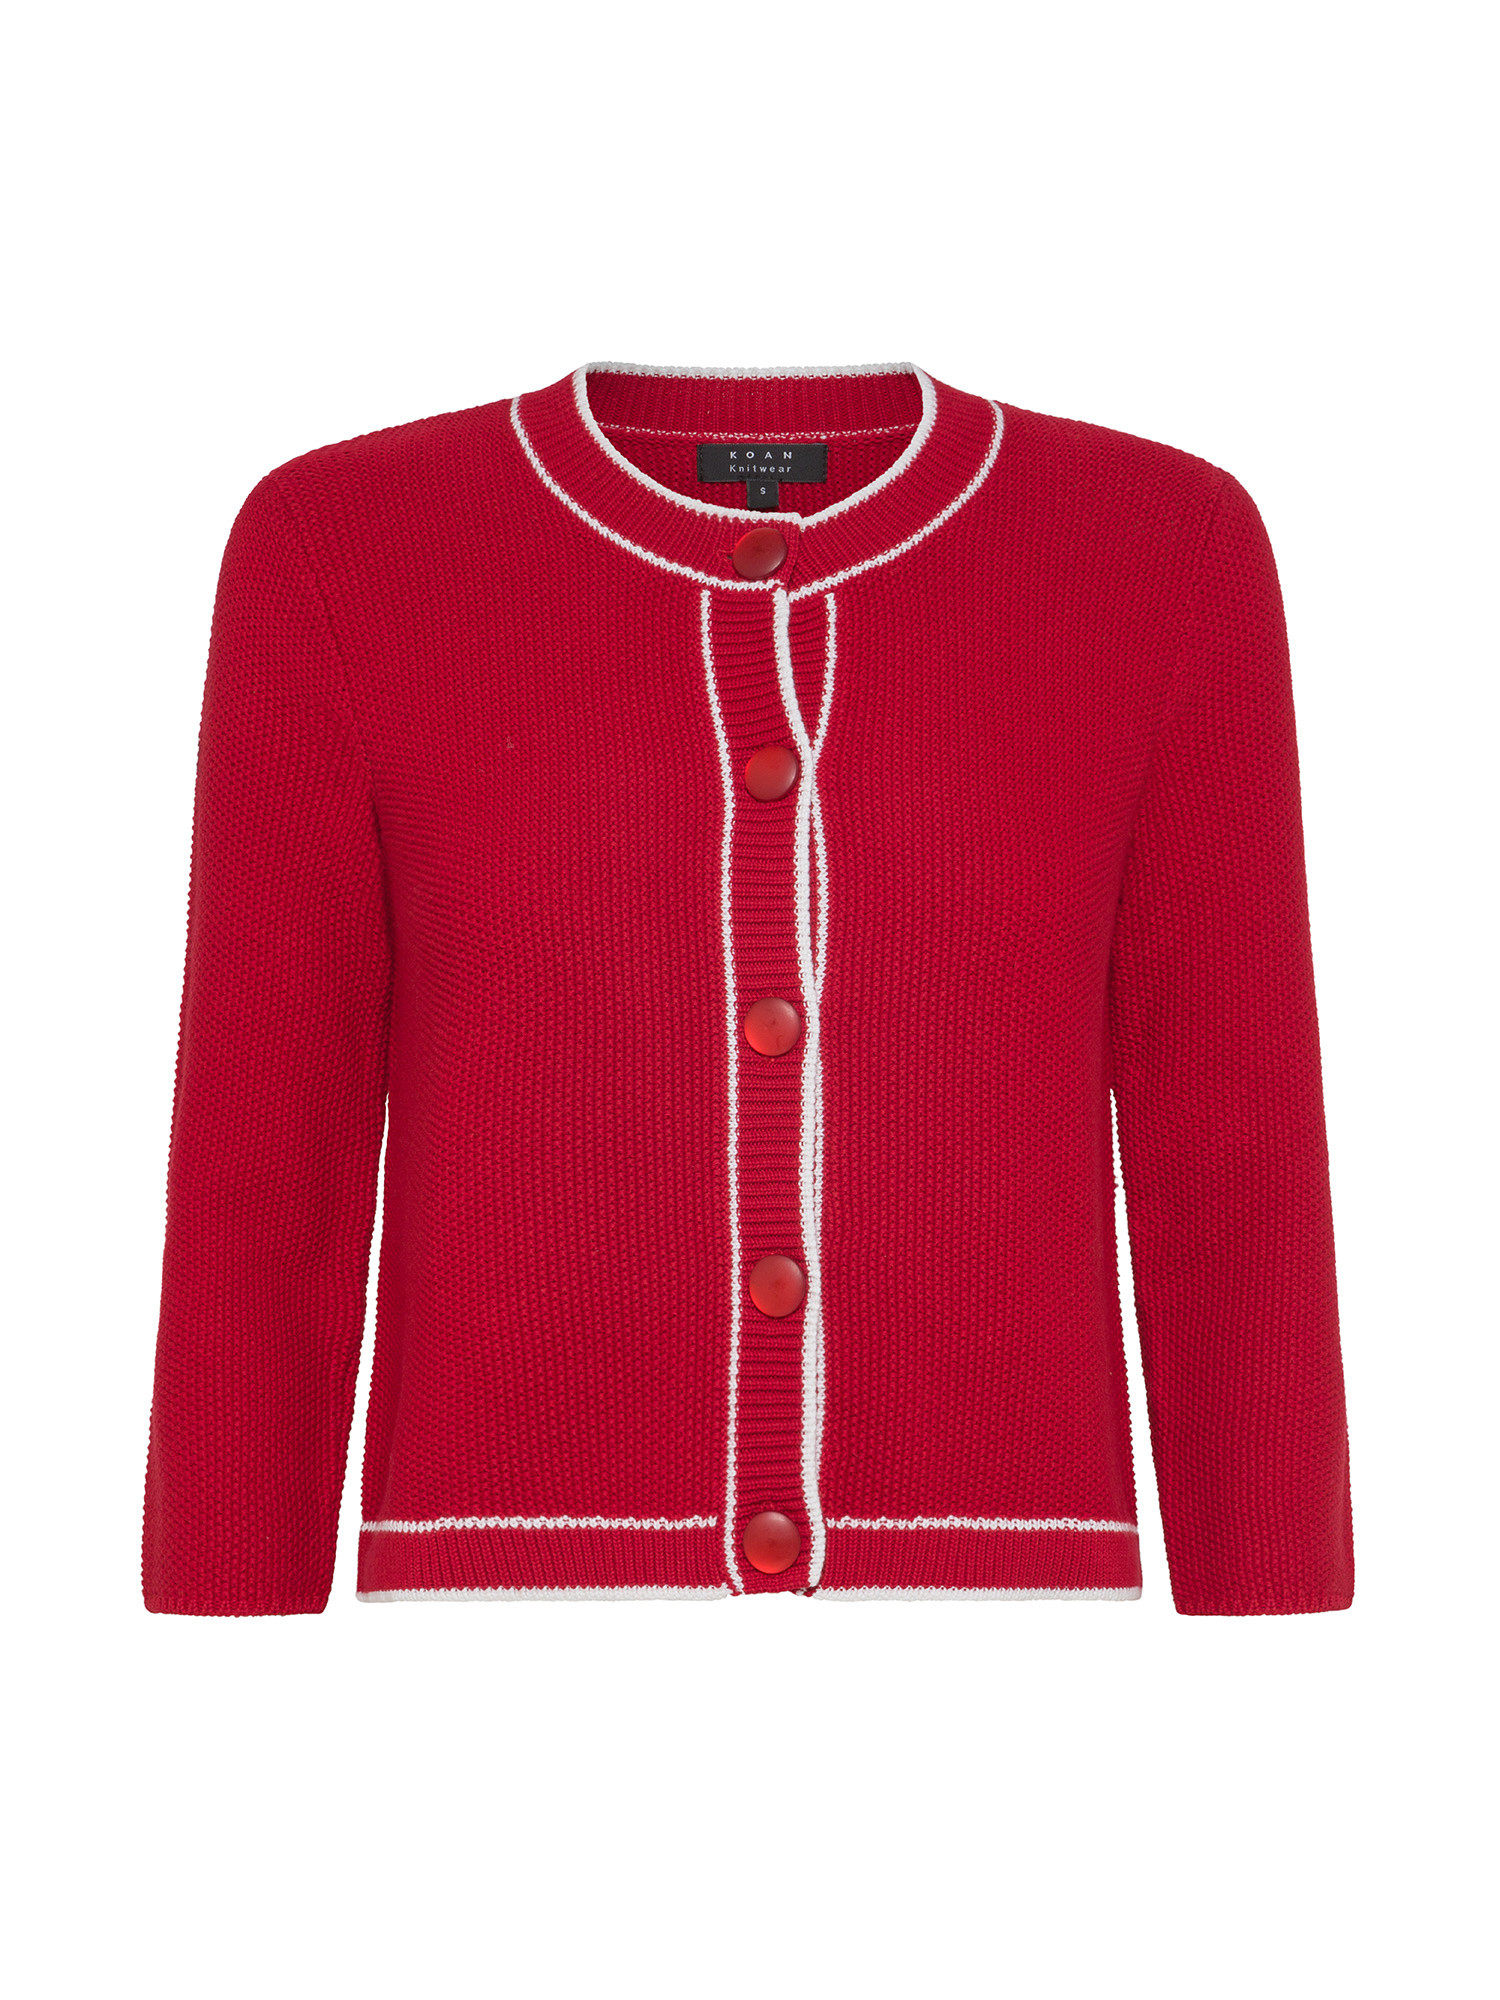 Koan - Short rice stitch cardigan in cotton, Red, large image number 0